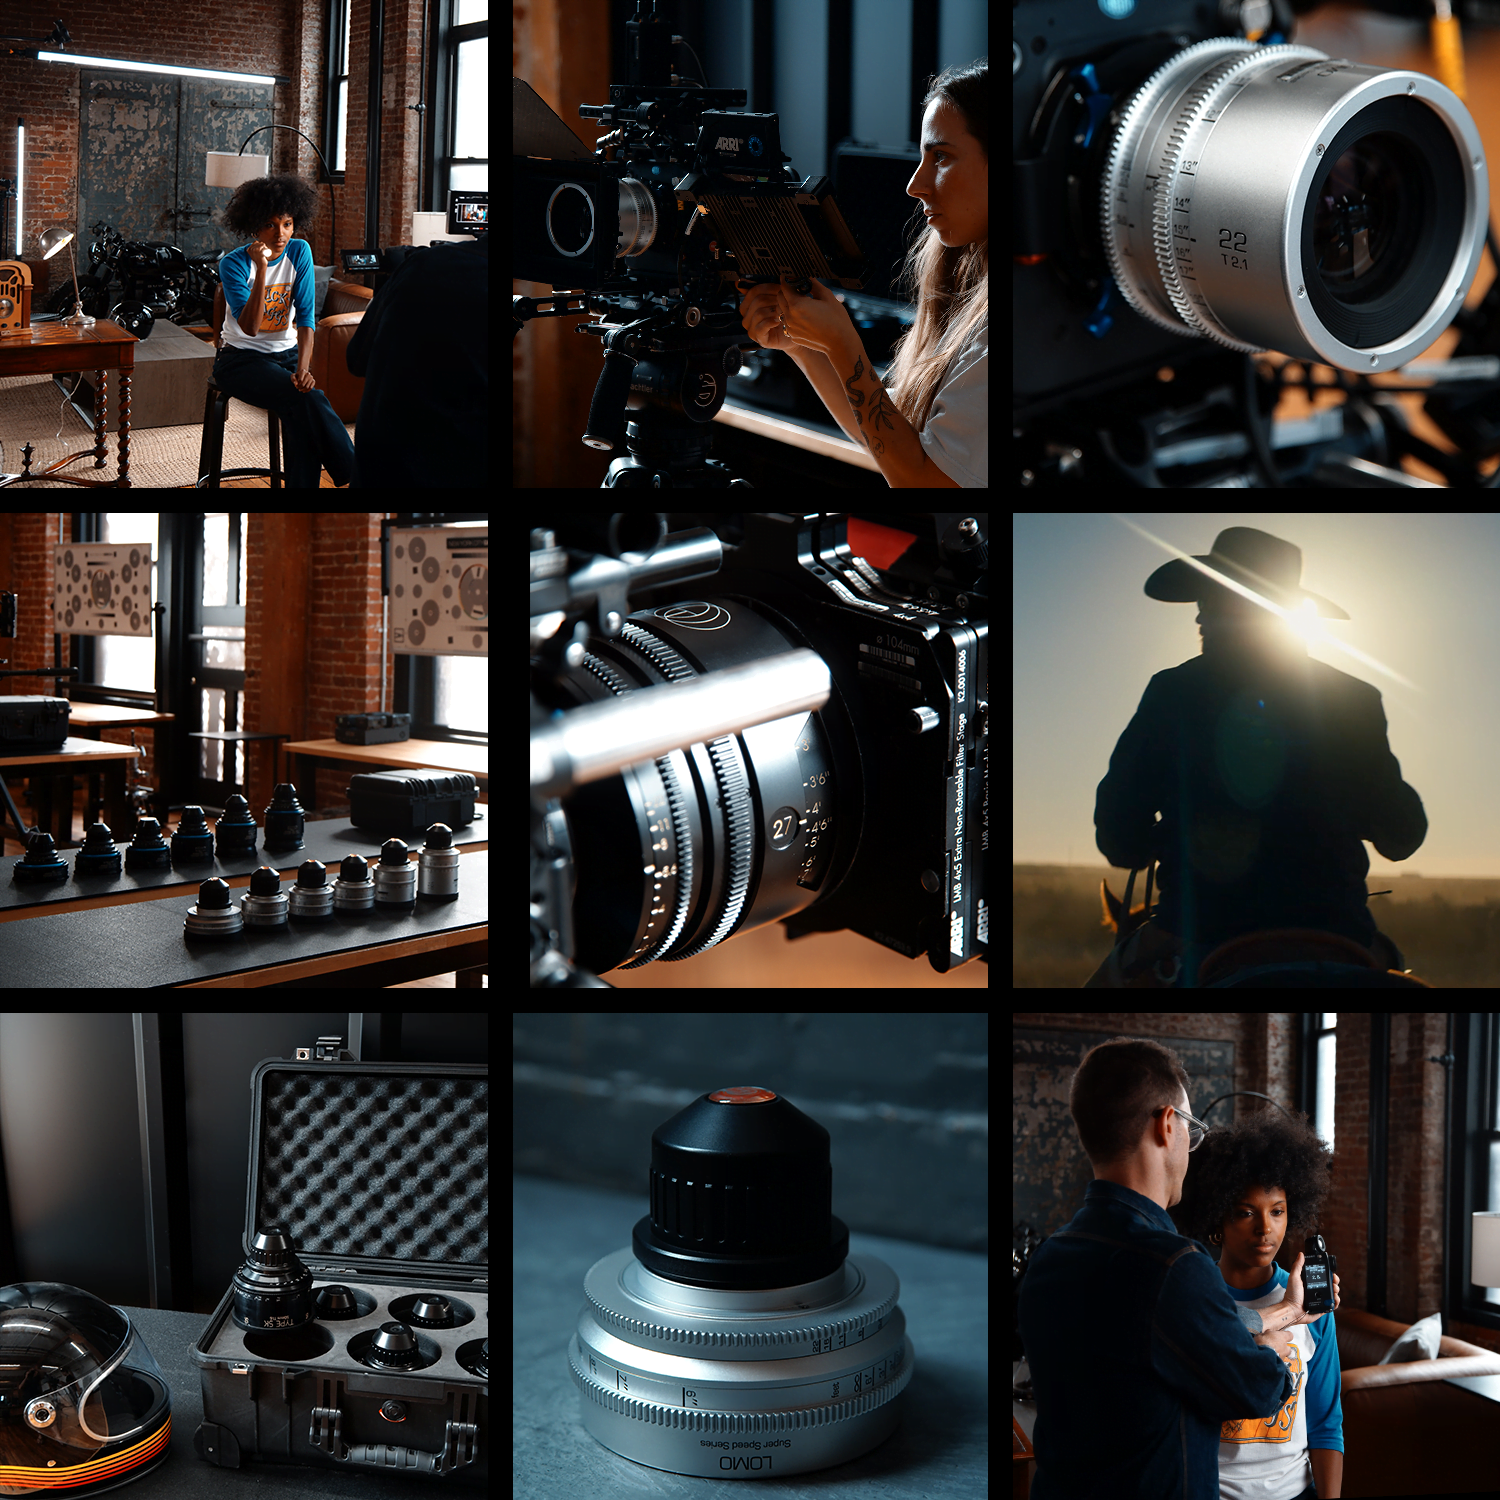 Grid of photos relating to cameras, lenses, and production. 